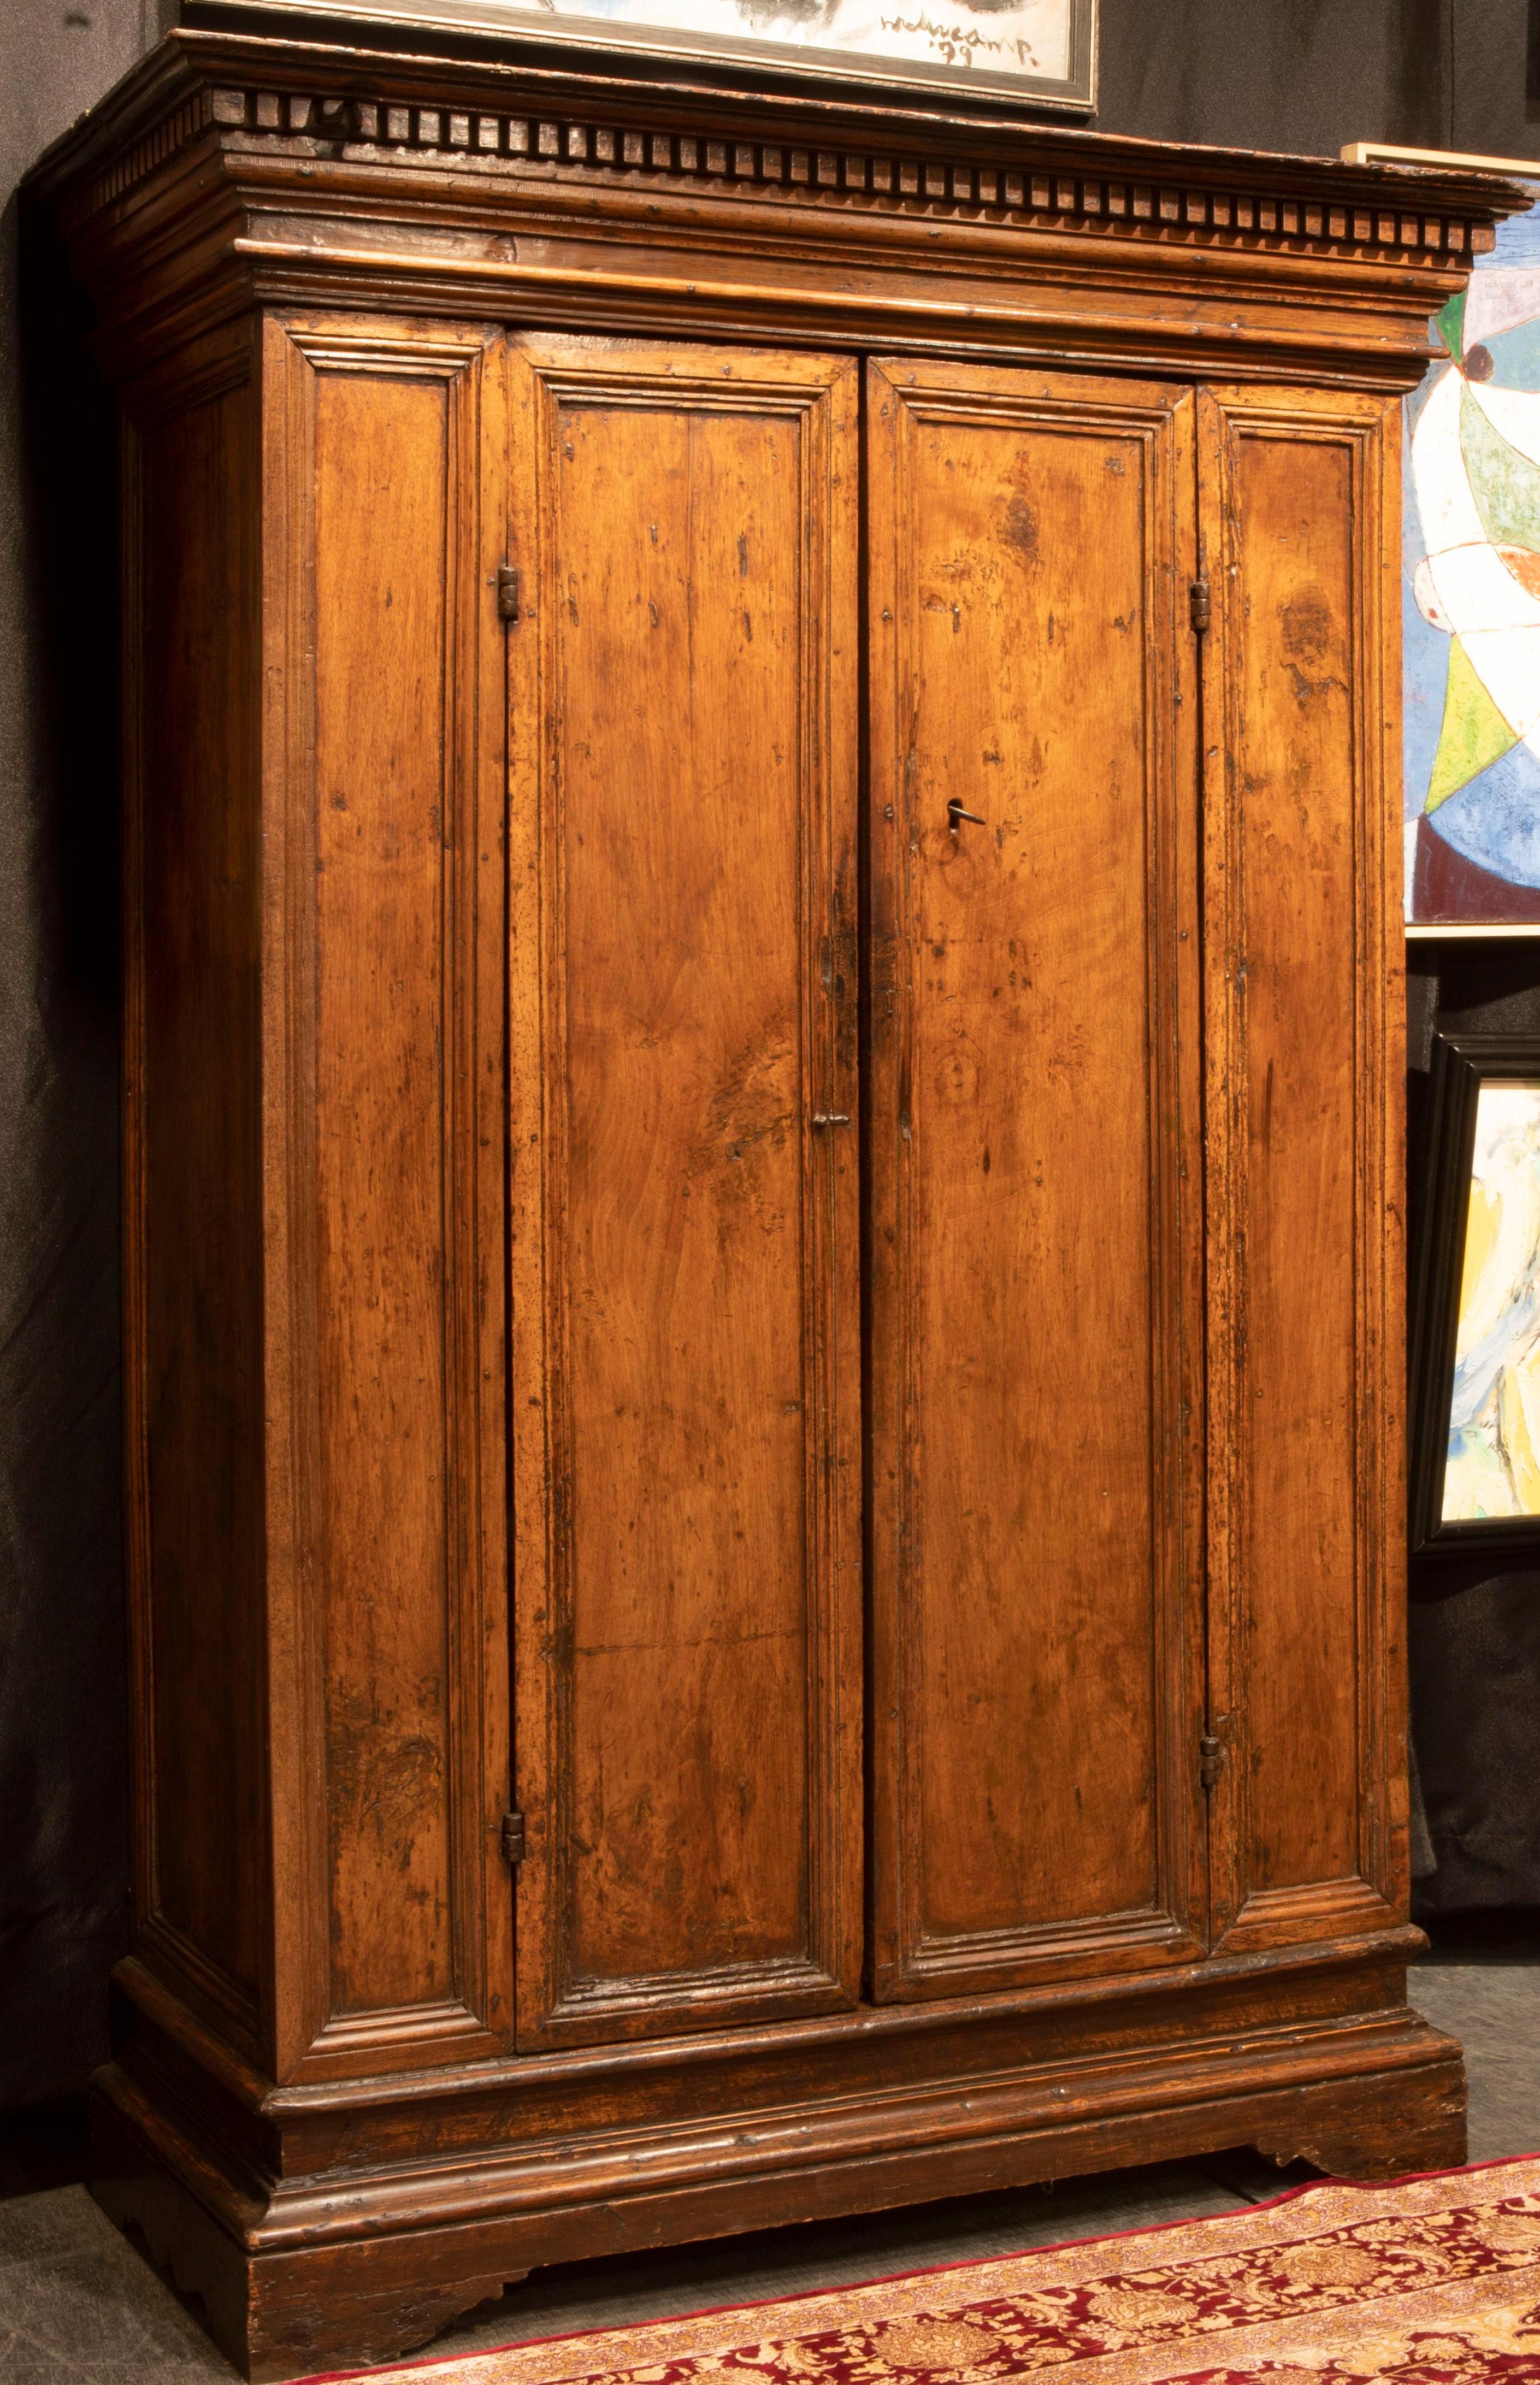 An exceptional late 16th, early 17th century Armoire in a beautifully patinated Walnut. Very good condition.
Rare perfect dimensions.
Purchased from Axel Vervoordt by the previous owner.



 